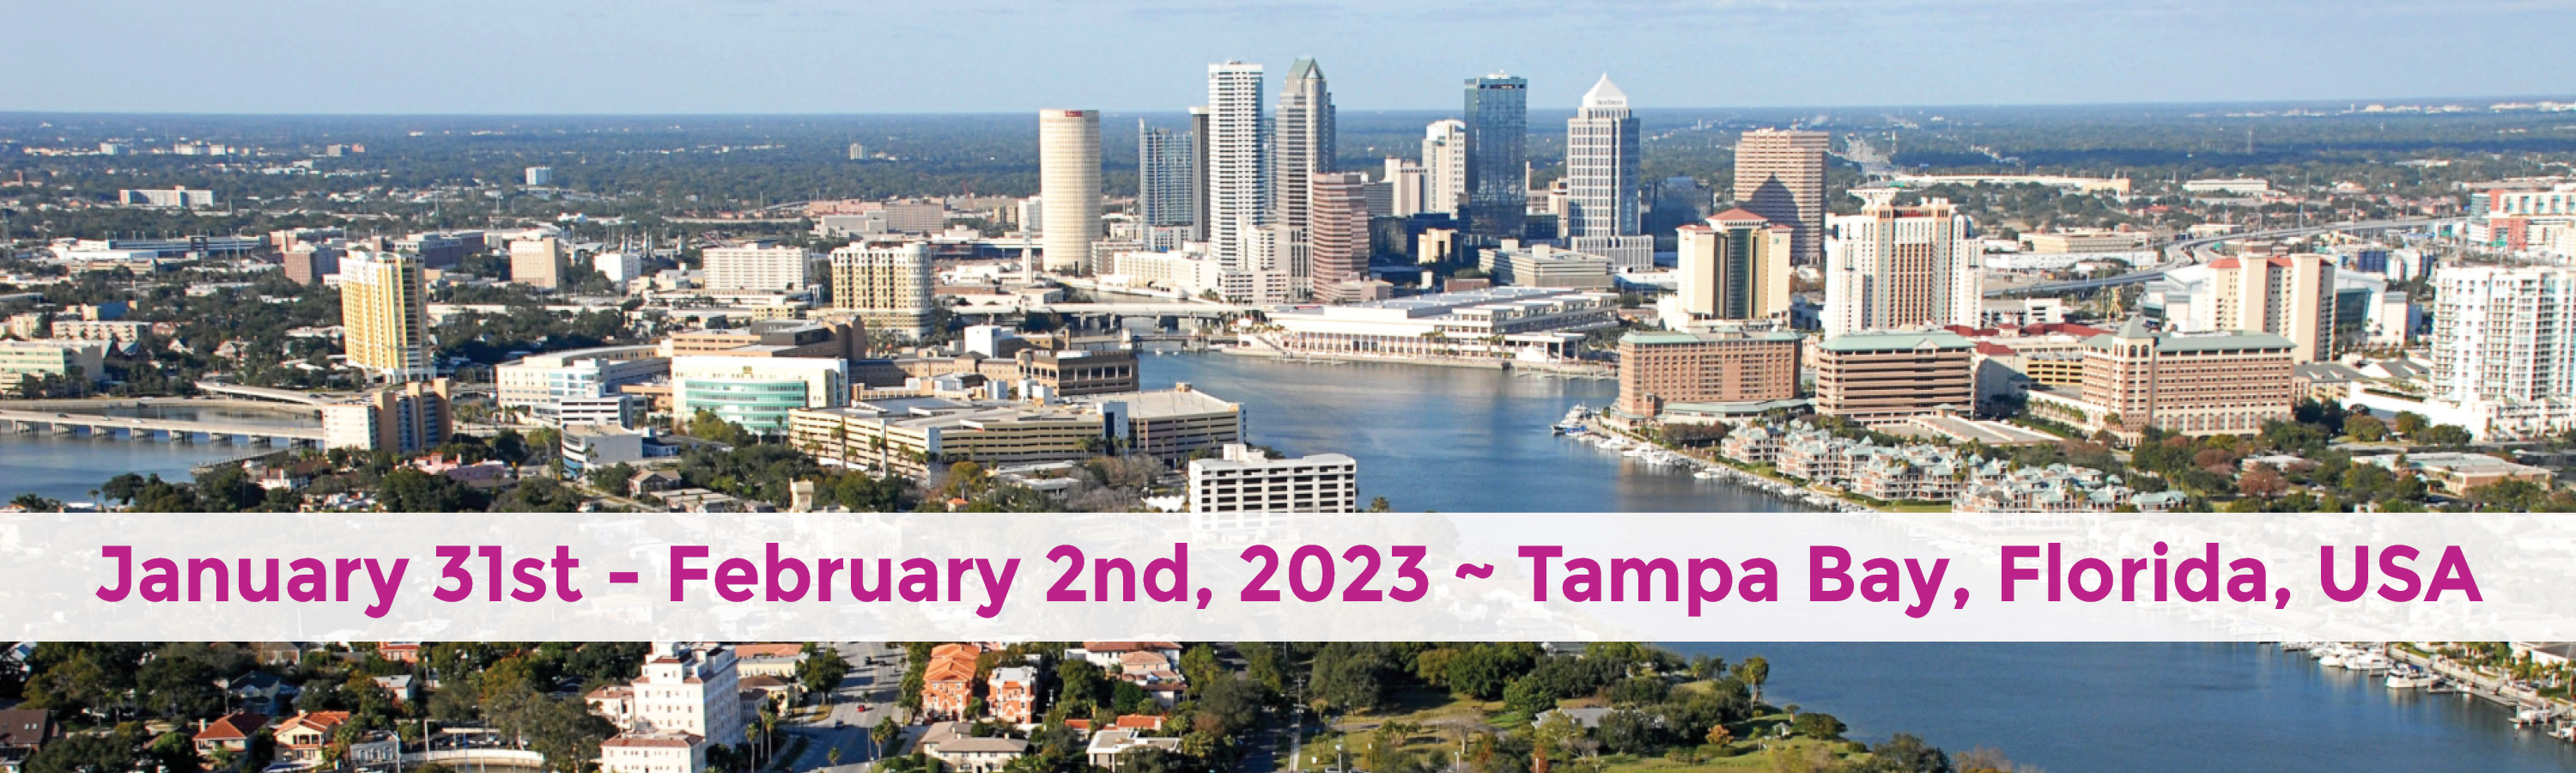 2022 BHBS Tampa Bay Event Page Header